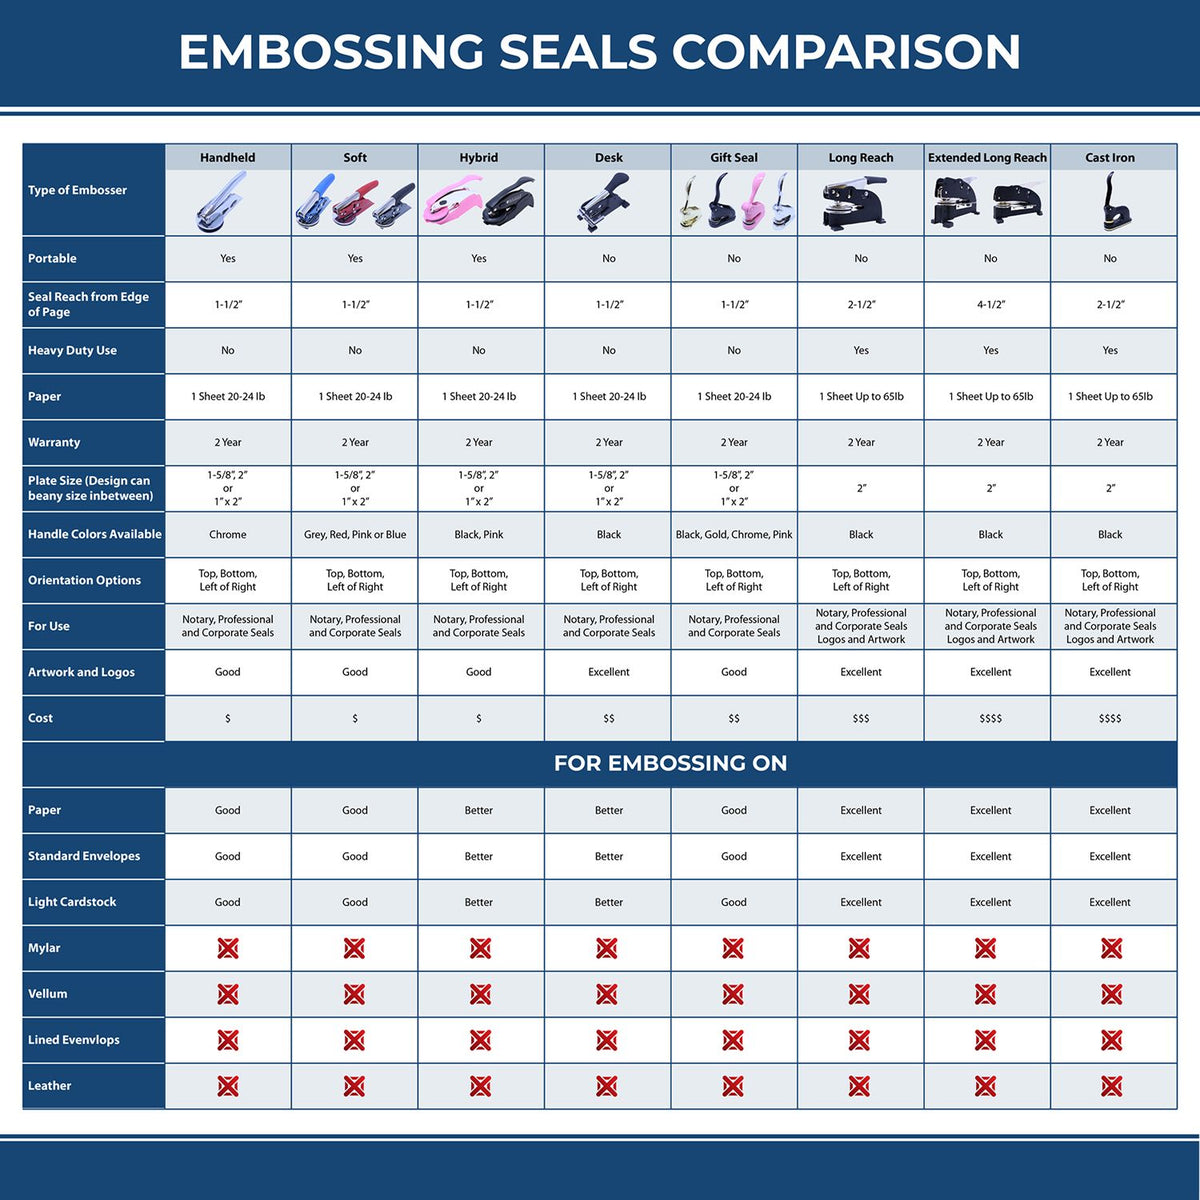 A comparison chart for the different types of mount models available for the State of Virginia Long Reach Architectural Embossing Seal.